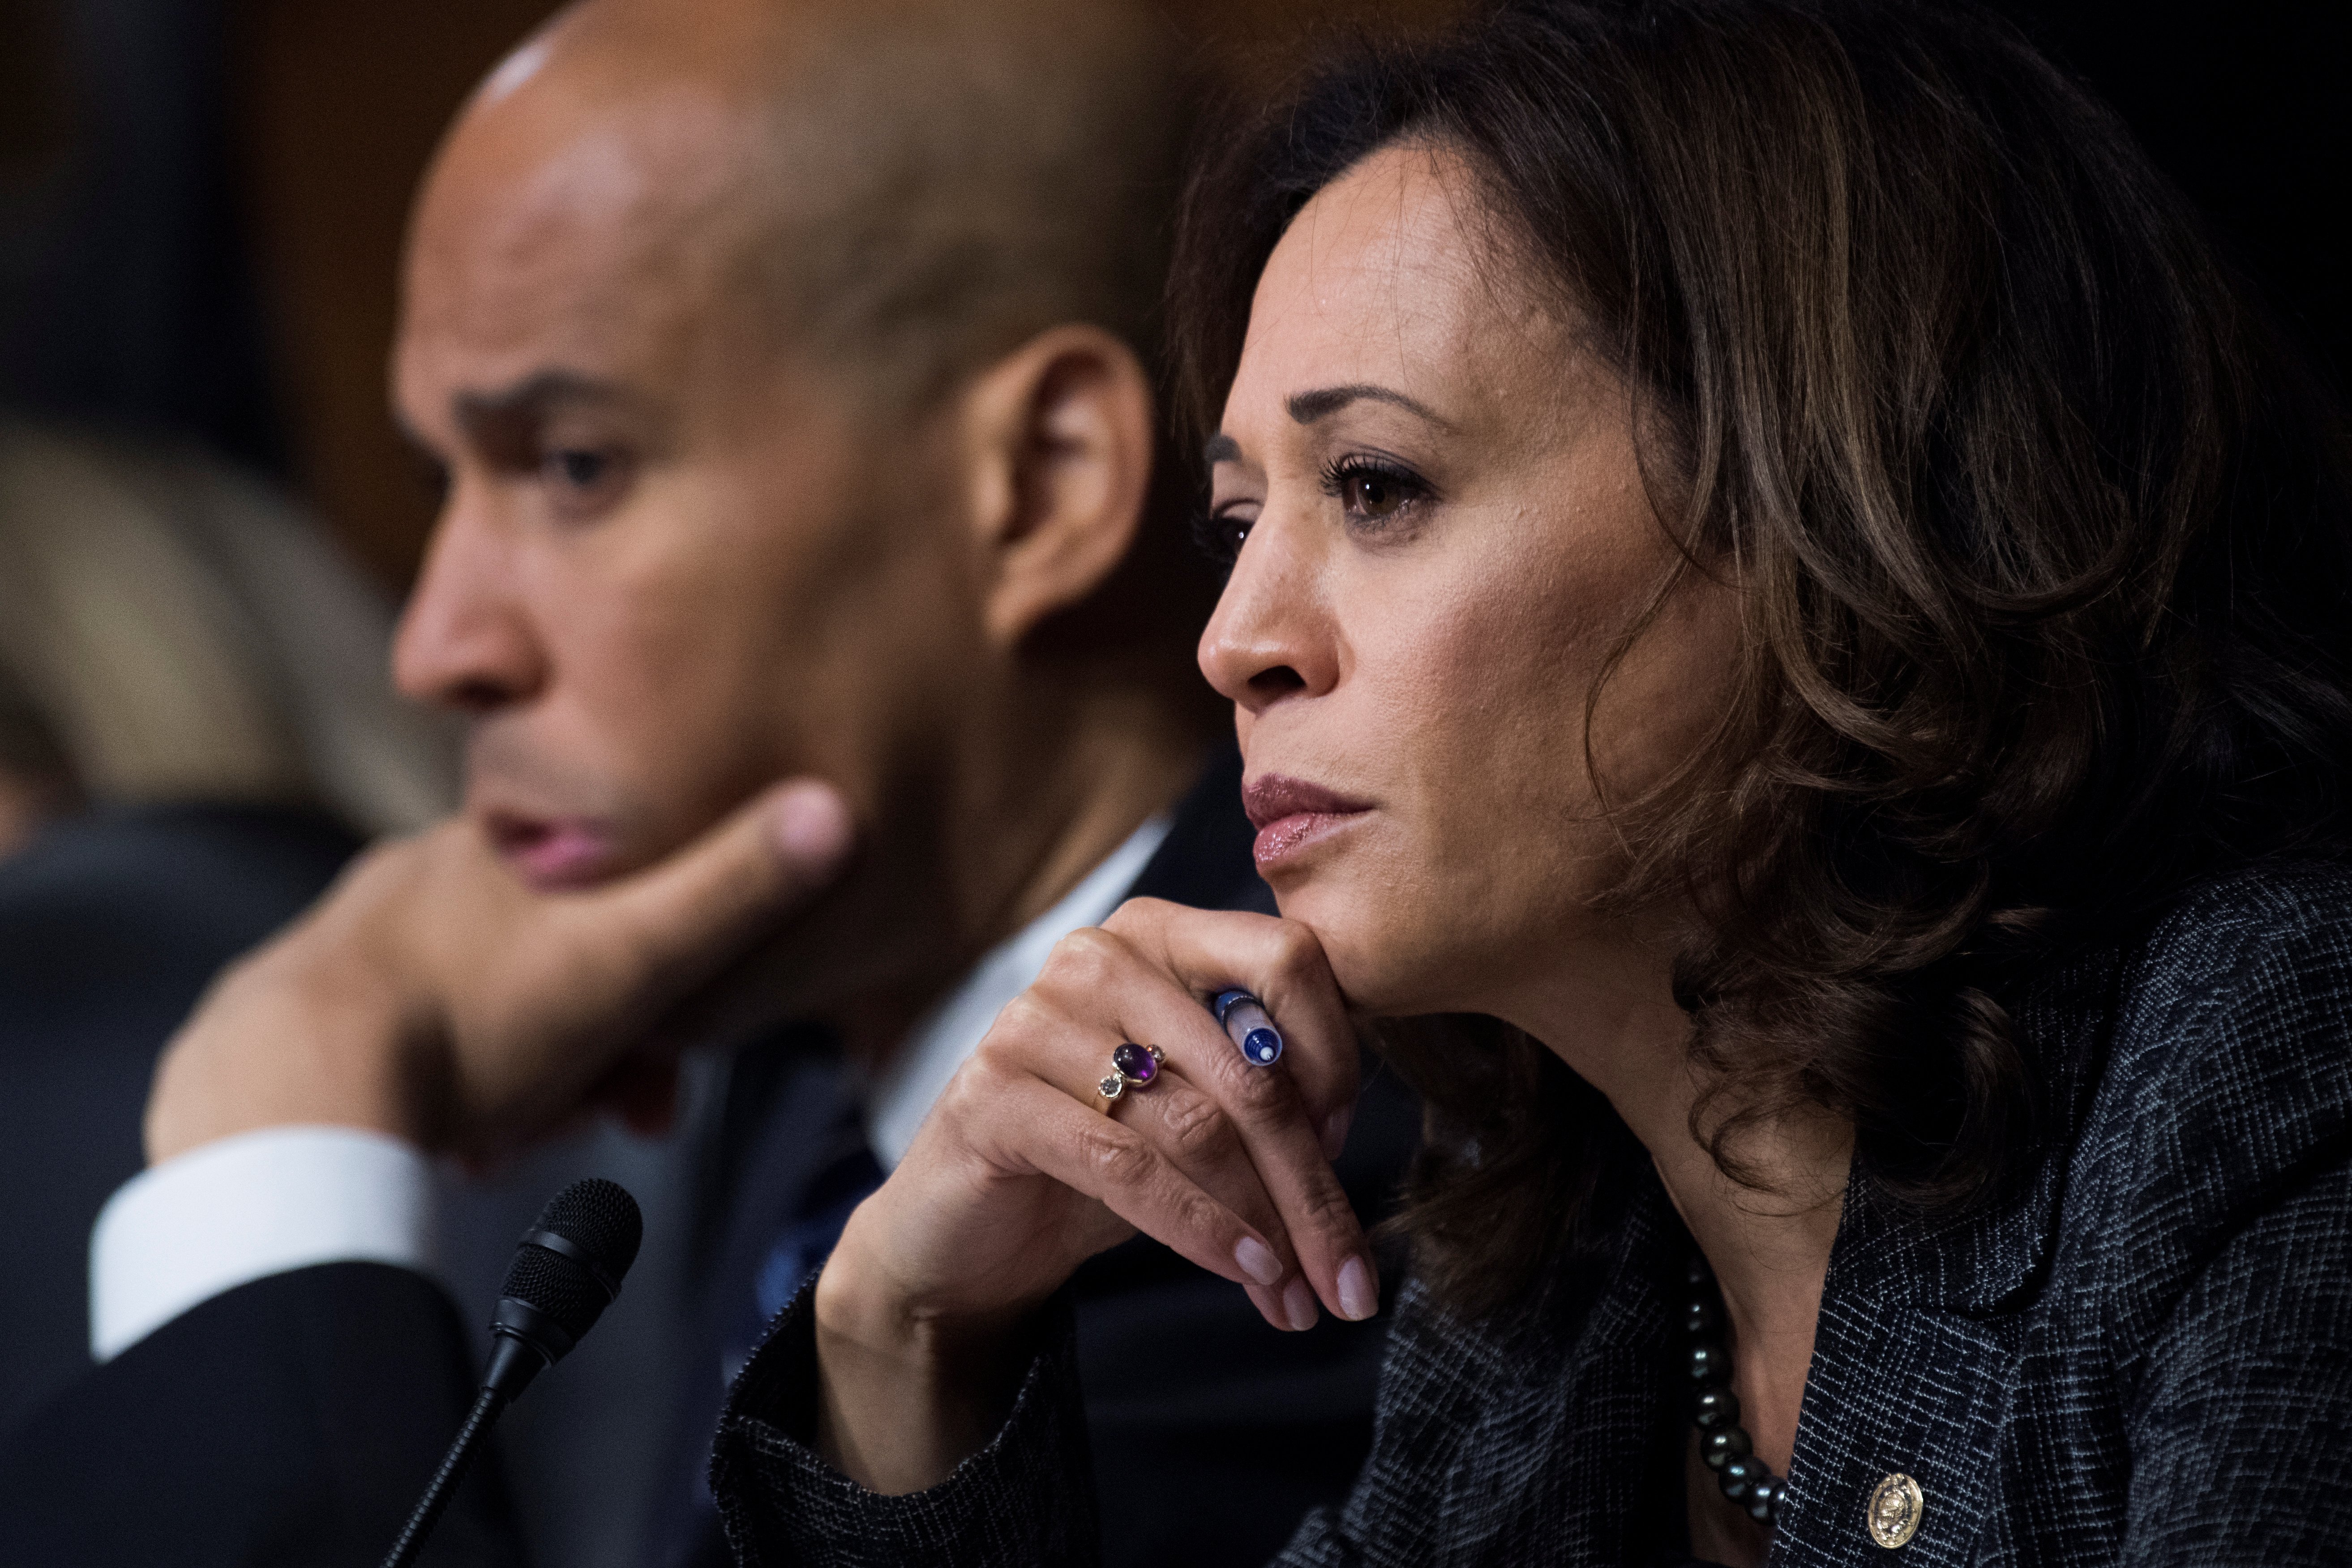 Sen. Cory Booker, D-N.J., and Sen. Kamala Harris, D-Calif., listen as Dr. Christine Blasey Ford testifies during the Senate Judiciary Committee hearing on the nomination of Brett M. Kavanaugh to be an associate justice of the Supreme Court of the United States, focusing on allegations of sexual assault by Kavanaugh against Christine Blasey Ford in the early 1980s, in Washington, DC, U.S., September 27, 2018. Picture taken September 27, 2018. Tom Williams/Pool